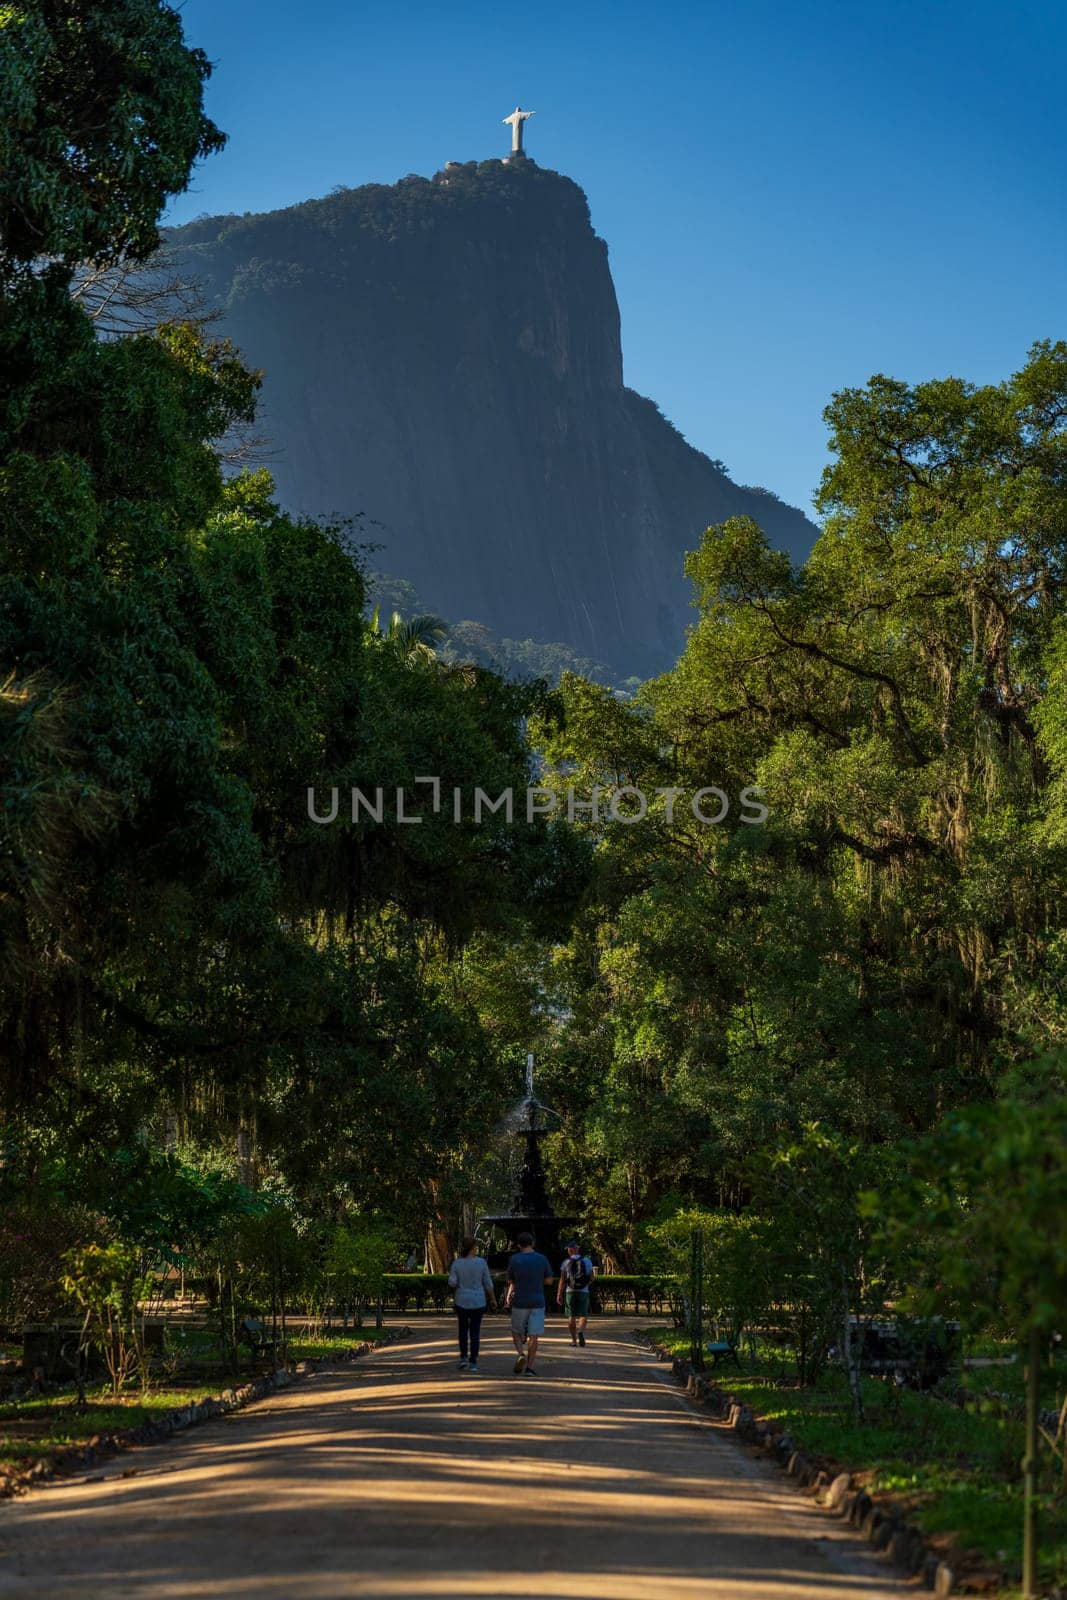 Statue of Christ Overlooking a Path Through a Lush Park by FerradalFCG